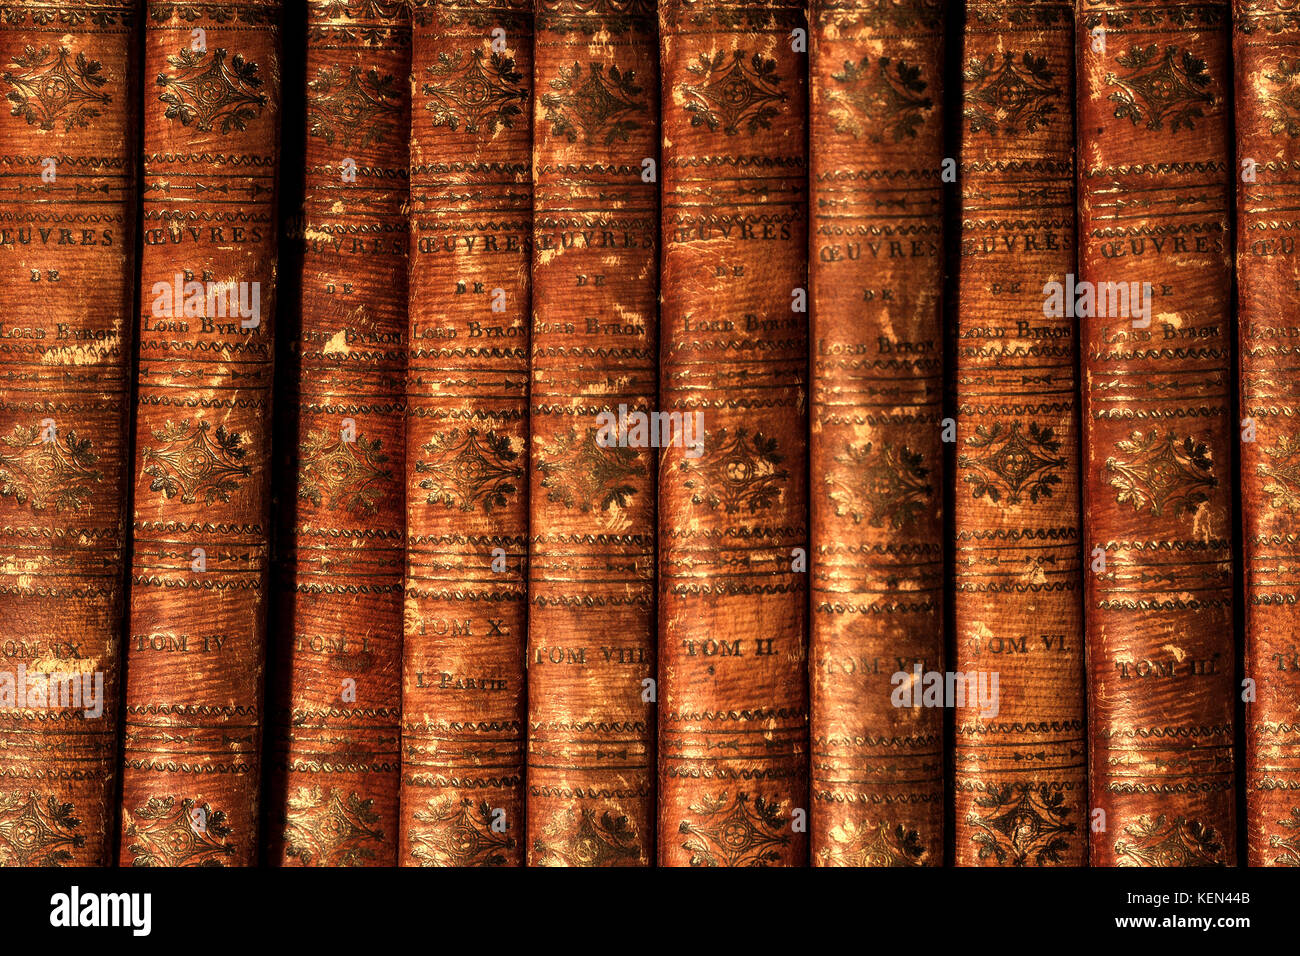 Antique vintage old retro worn grunge brown books by Lord Byron in row on bookshelf. Stock Photo